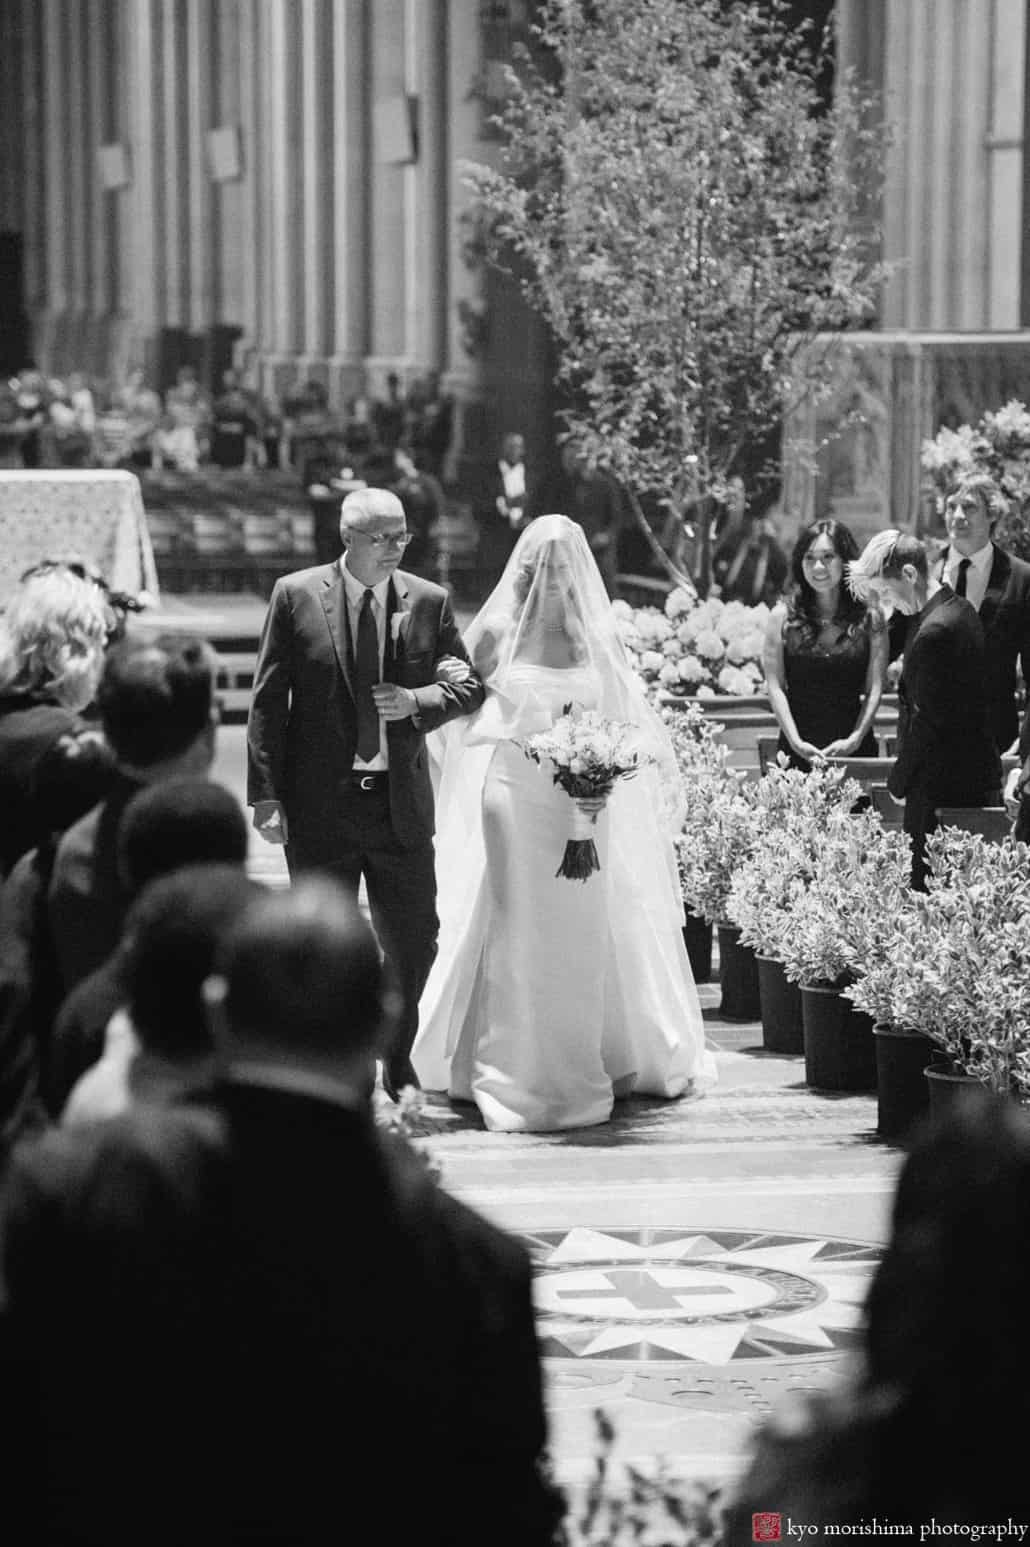 Bride and uncle walk down the aisle at St. John the Divine wedding in the chapel, photographed by Kyo Morishima